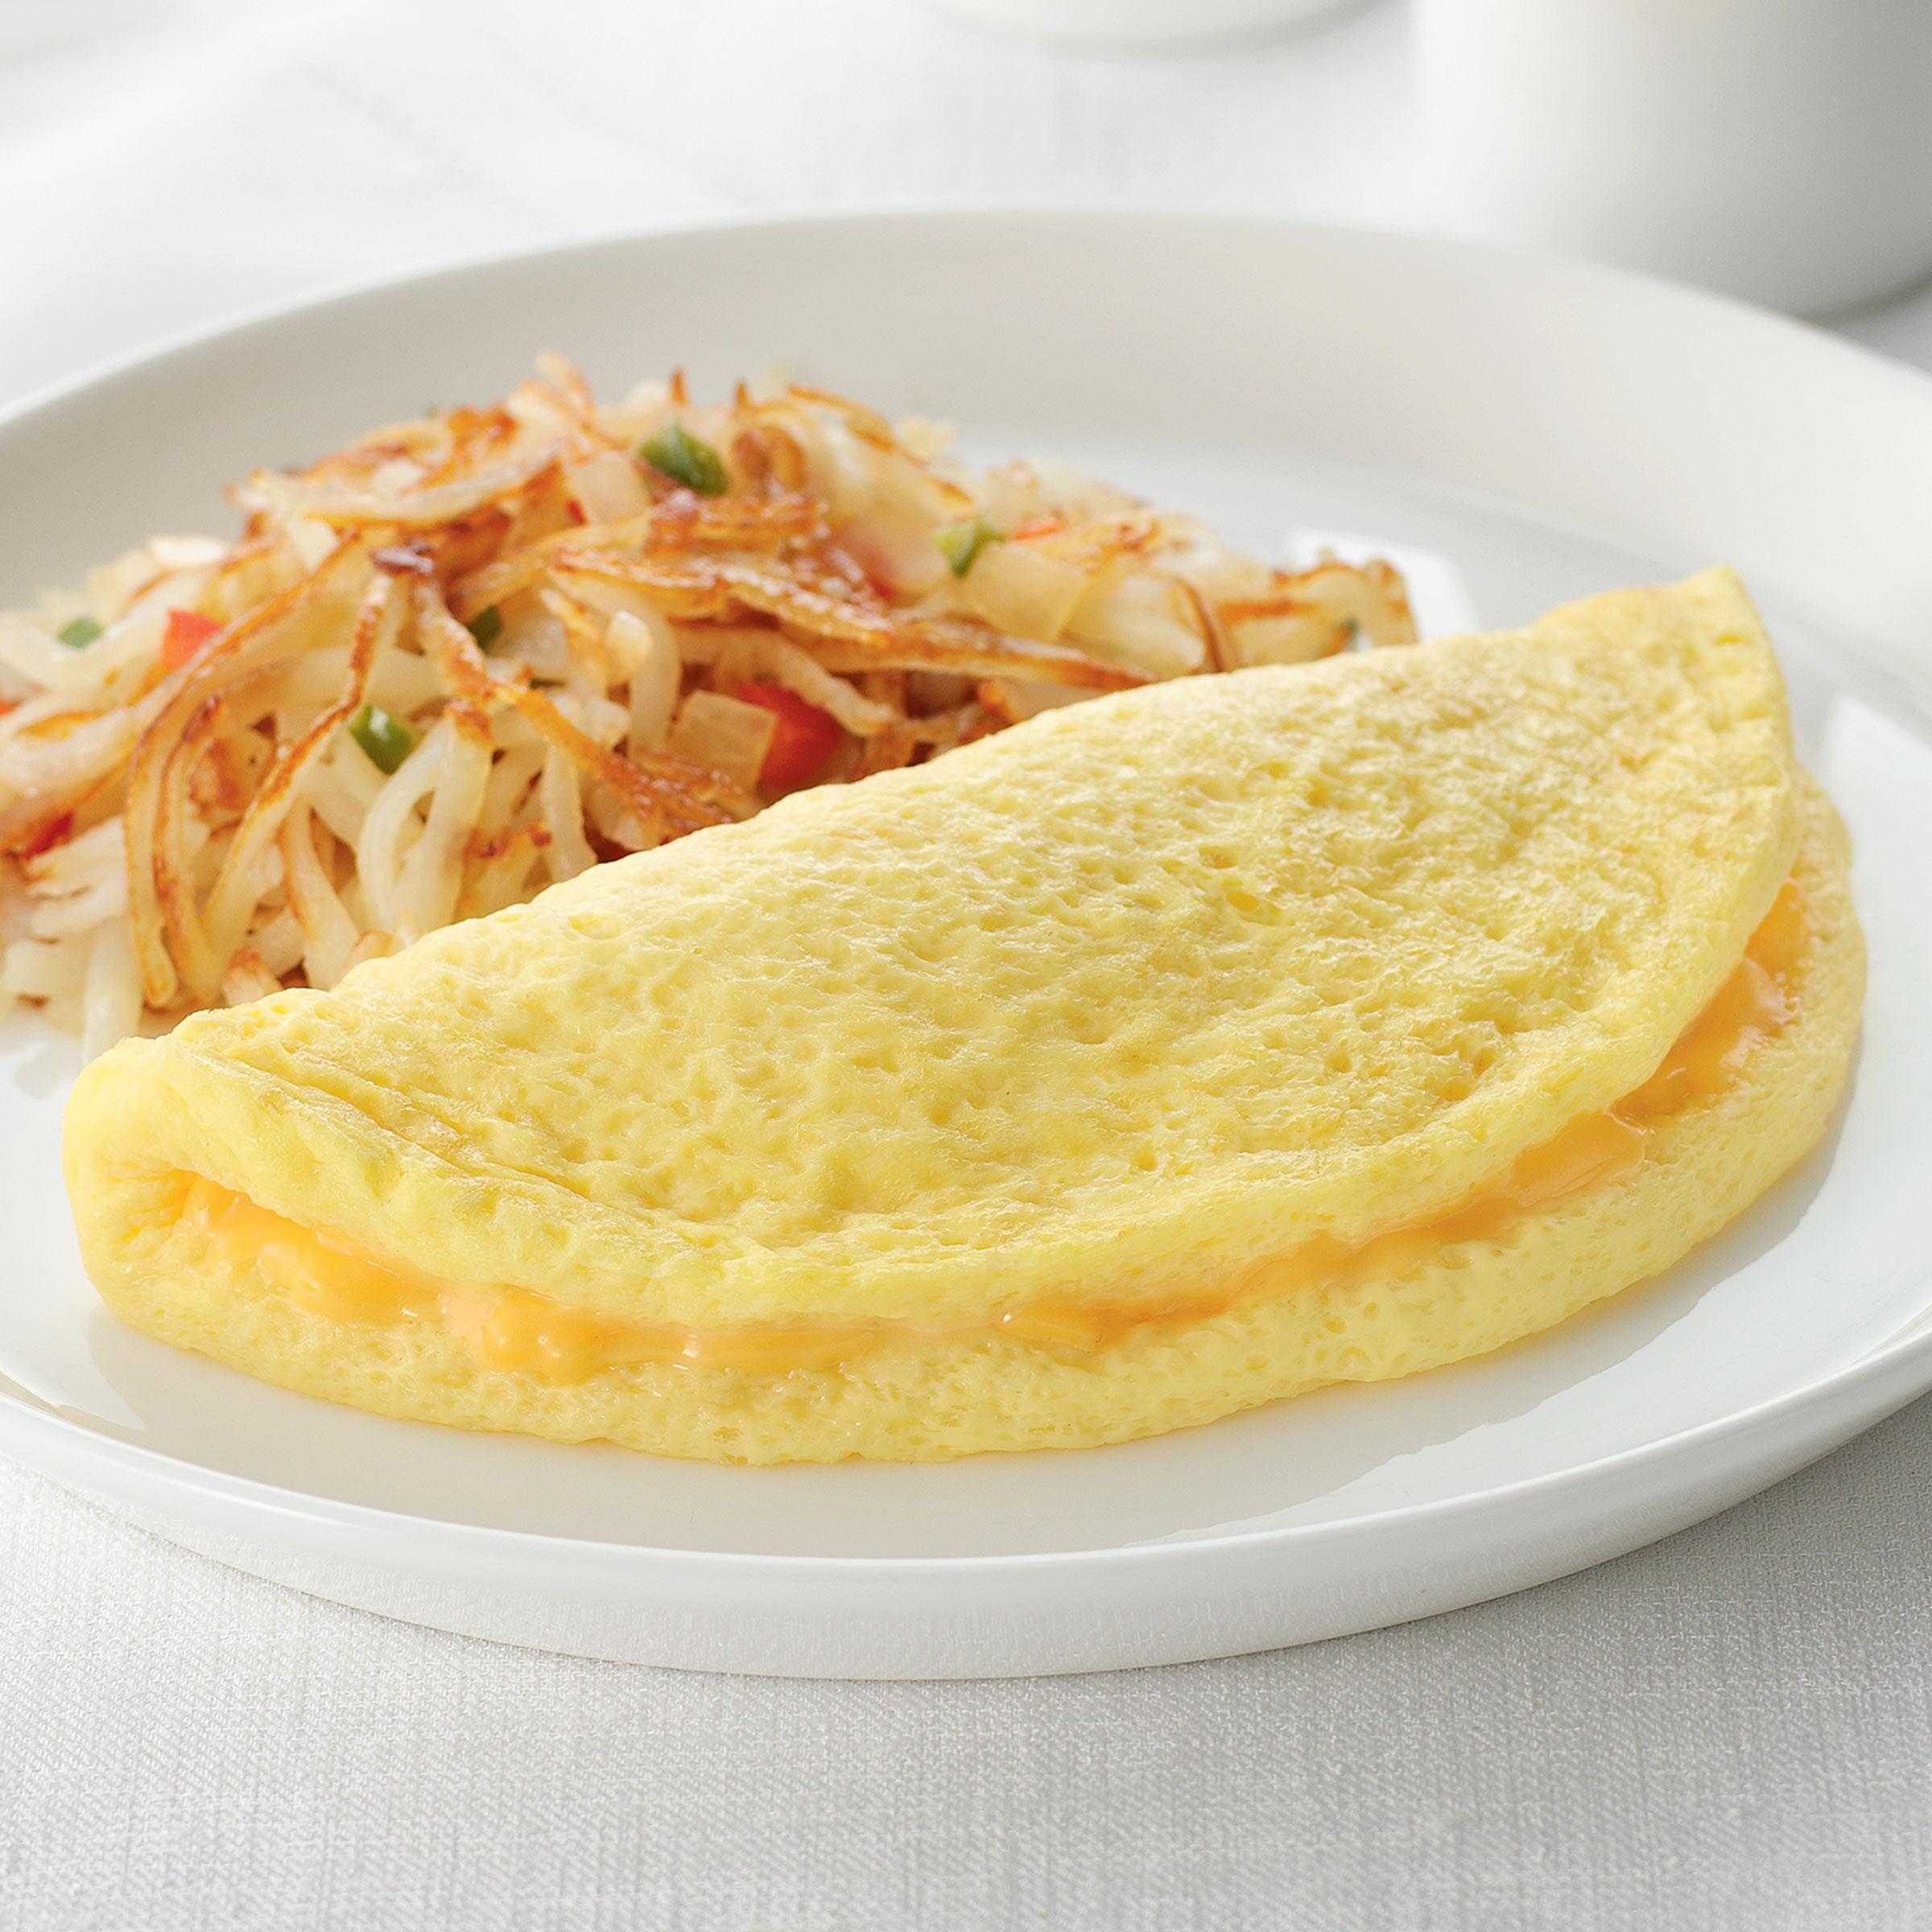 Papetti’s® Fully-Cooked 6″ x 3″ Singlefold Omelet Filled with Cheddar Cheese with Medium Browning, 72/3.5 Oz